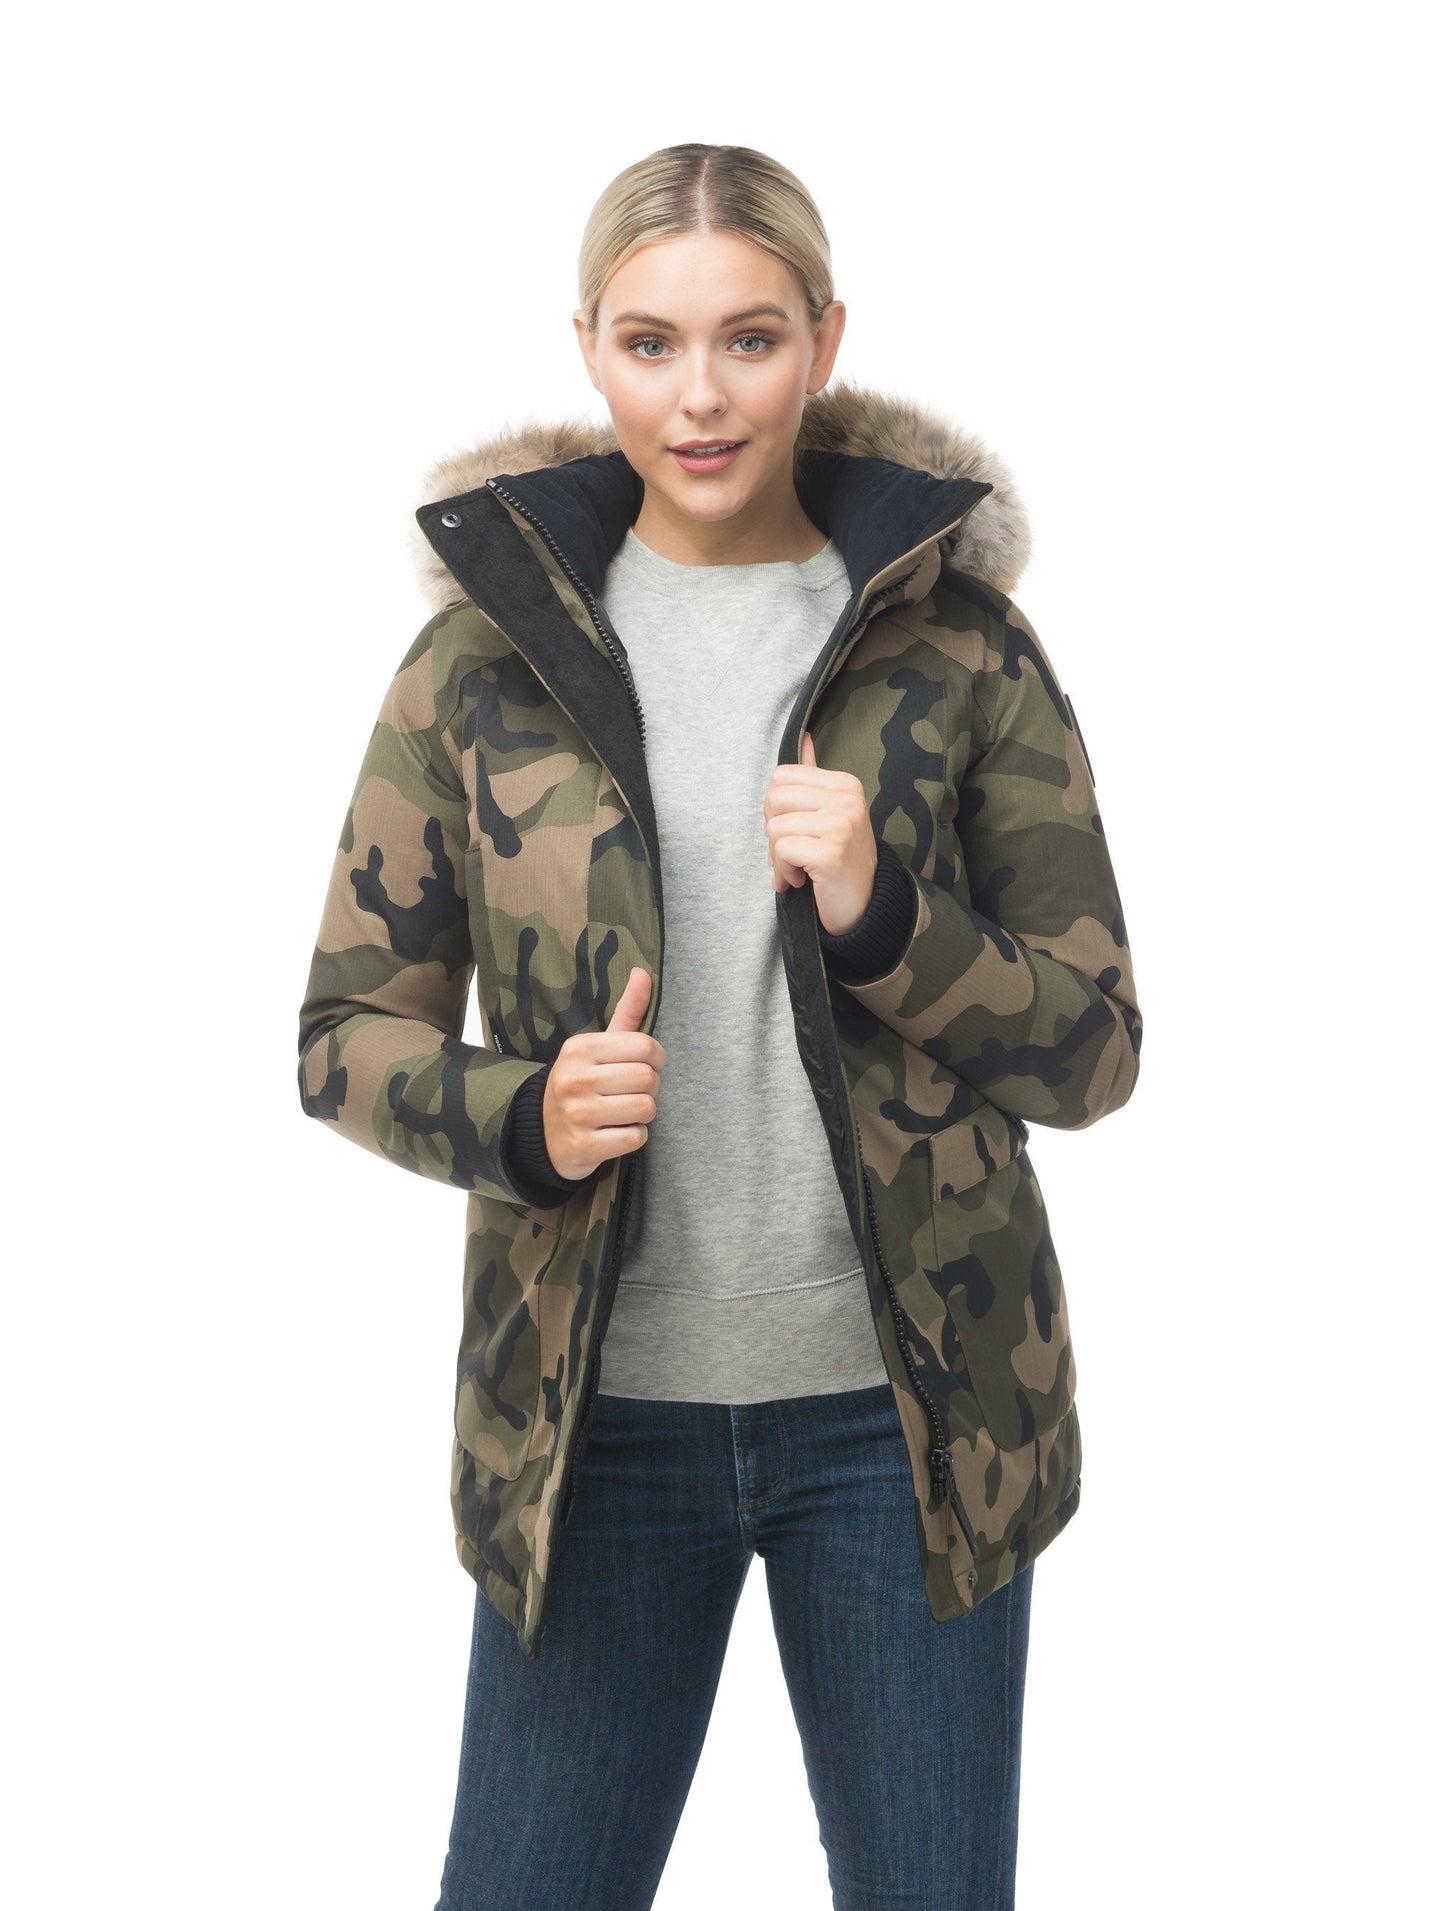 Women's down filled parka that sits just below the hip with a clean look and two hip patch pockets in CH Camo